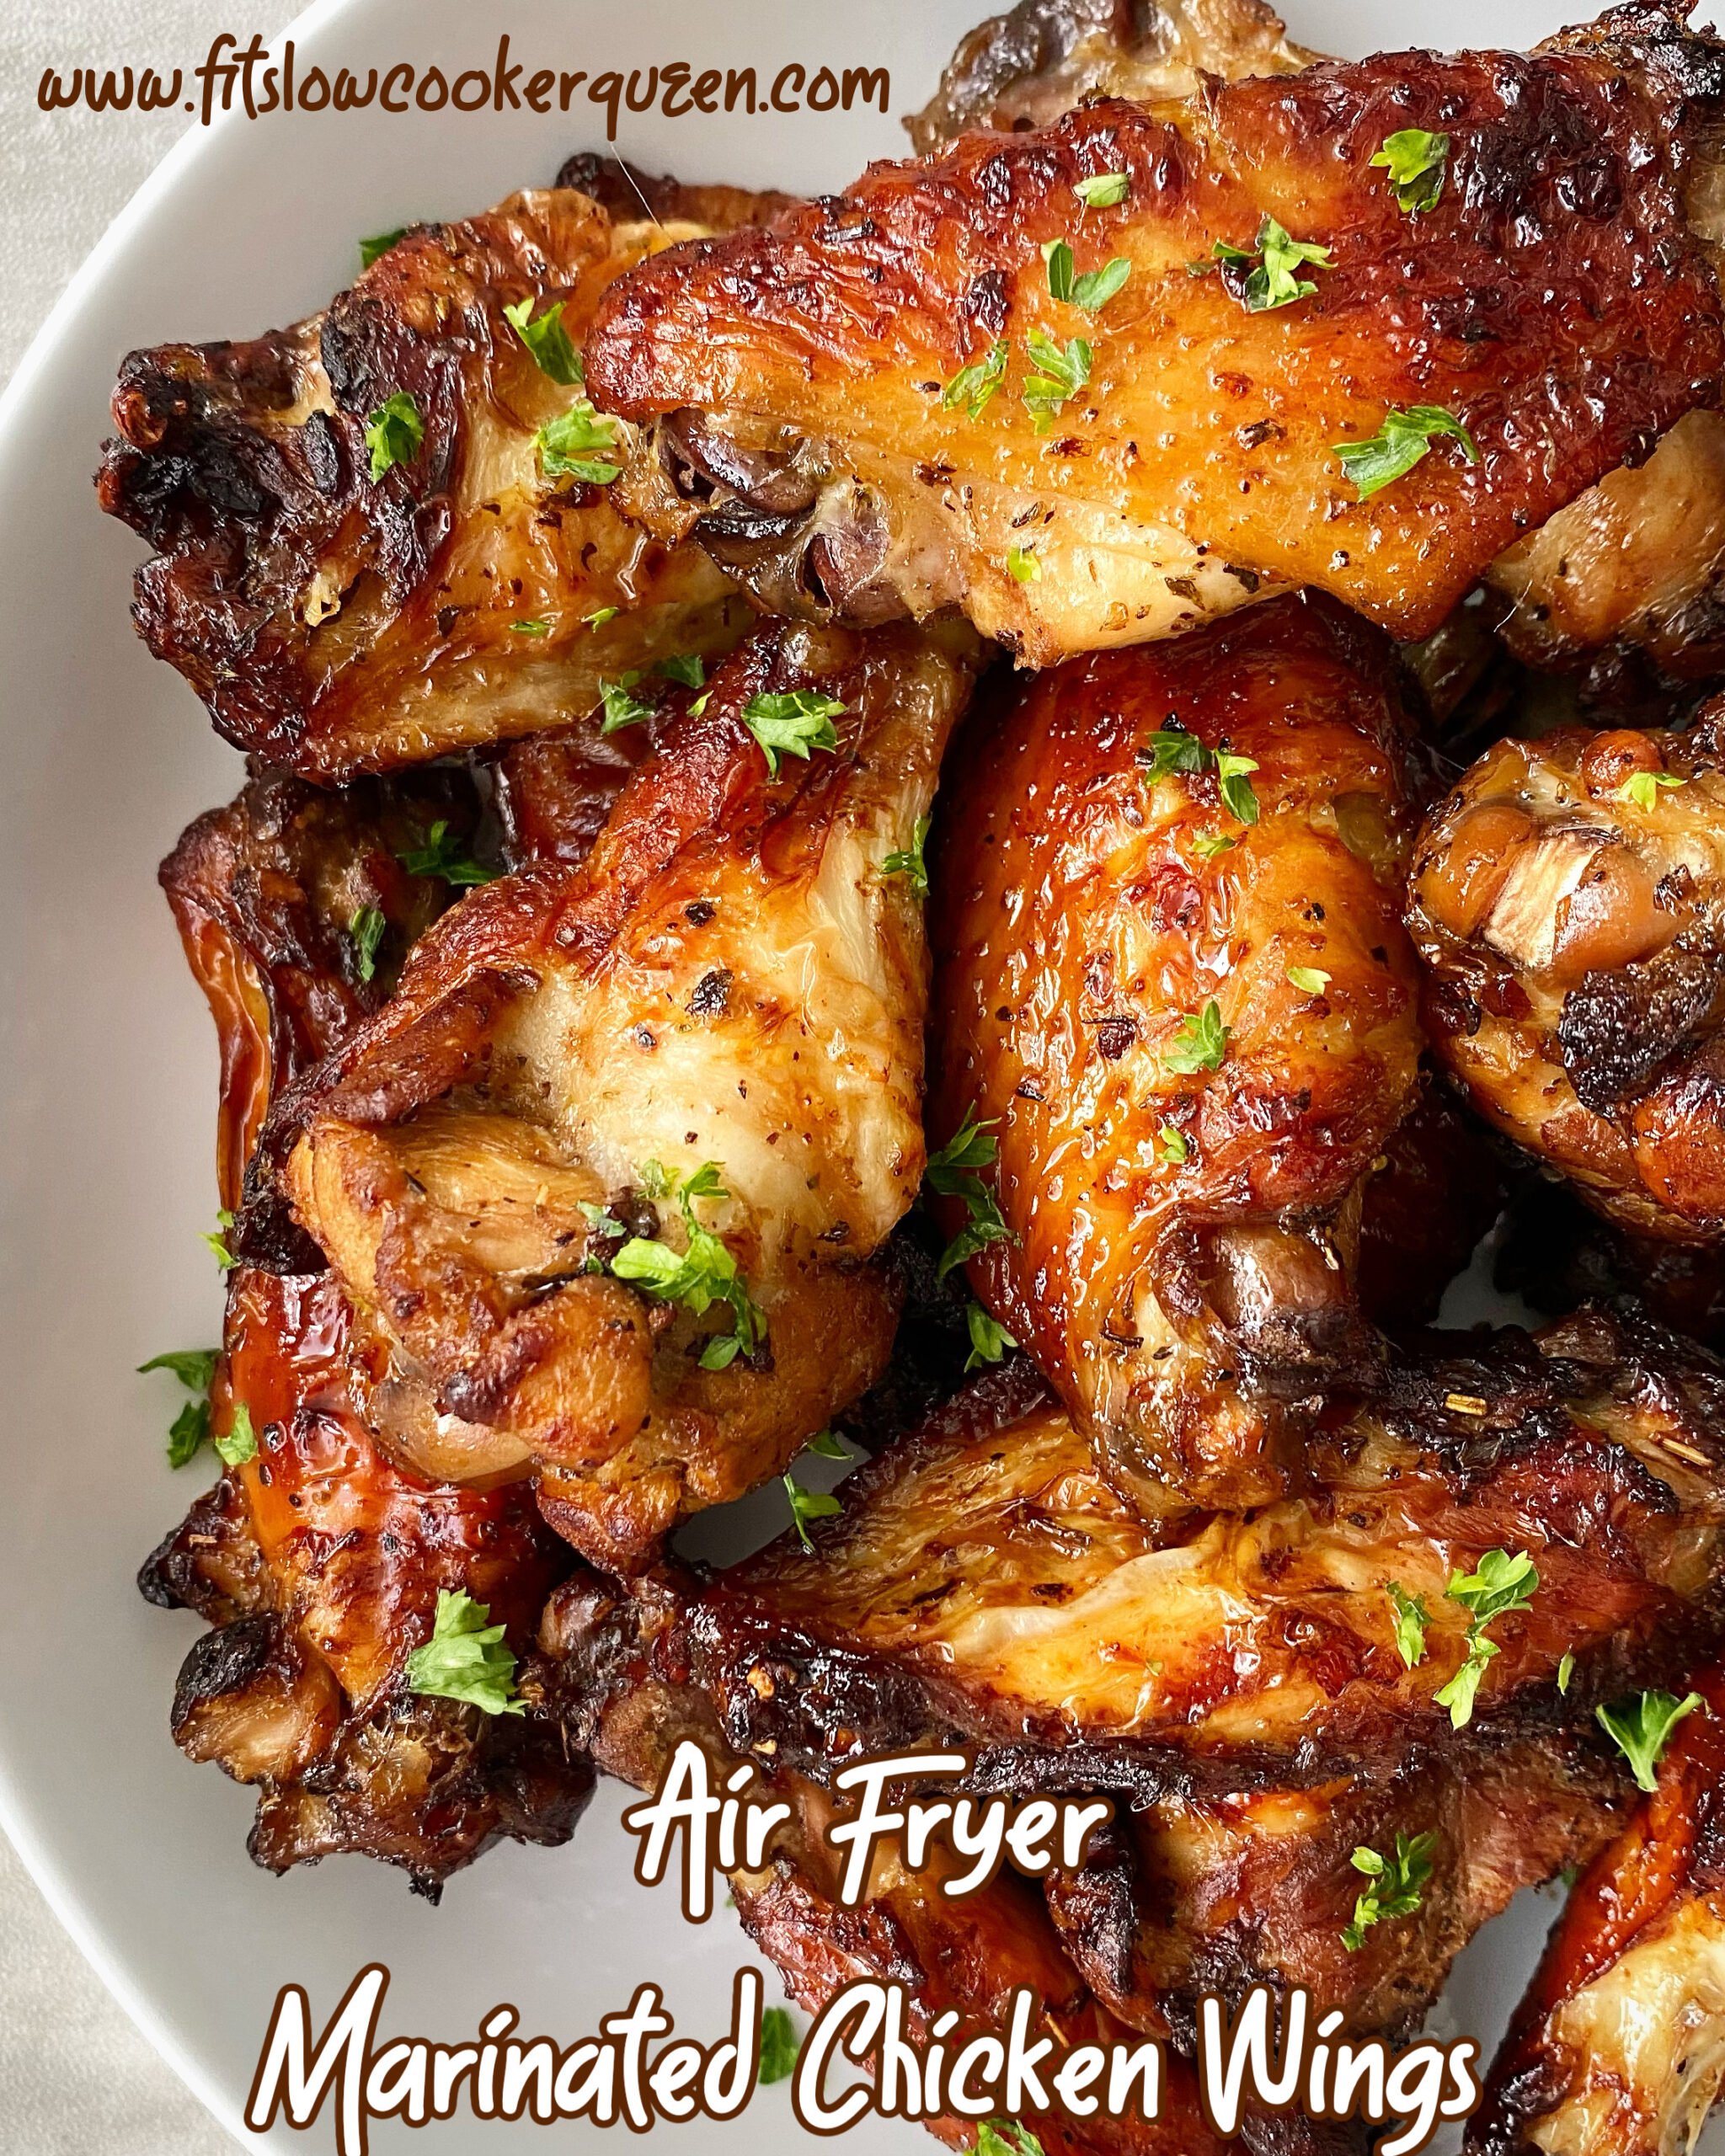 https://fitslowcookerqueen.com/wp-content/uploads/2019/09/Pinterest-Air-Fryer-Marinated-Chicken-Wings-scaled.jpg